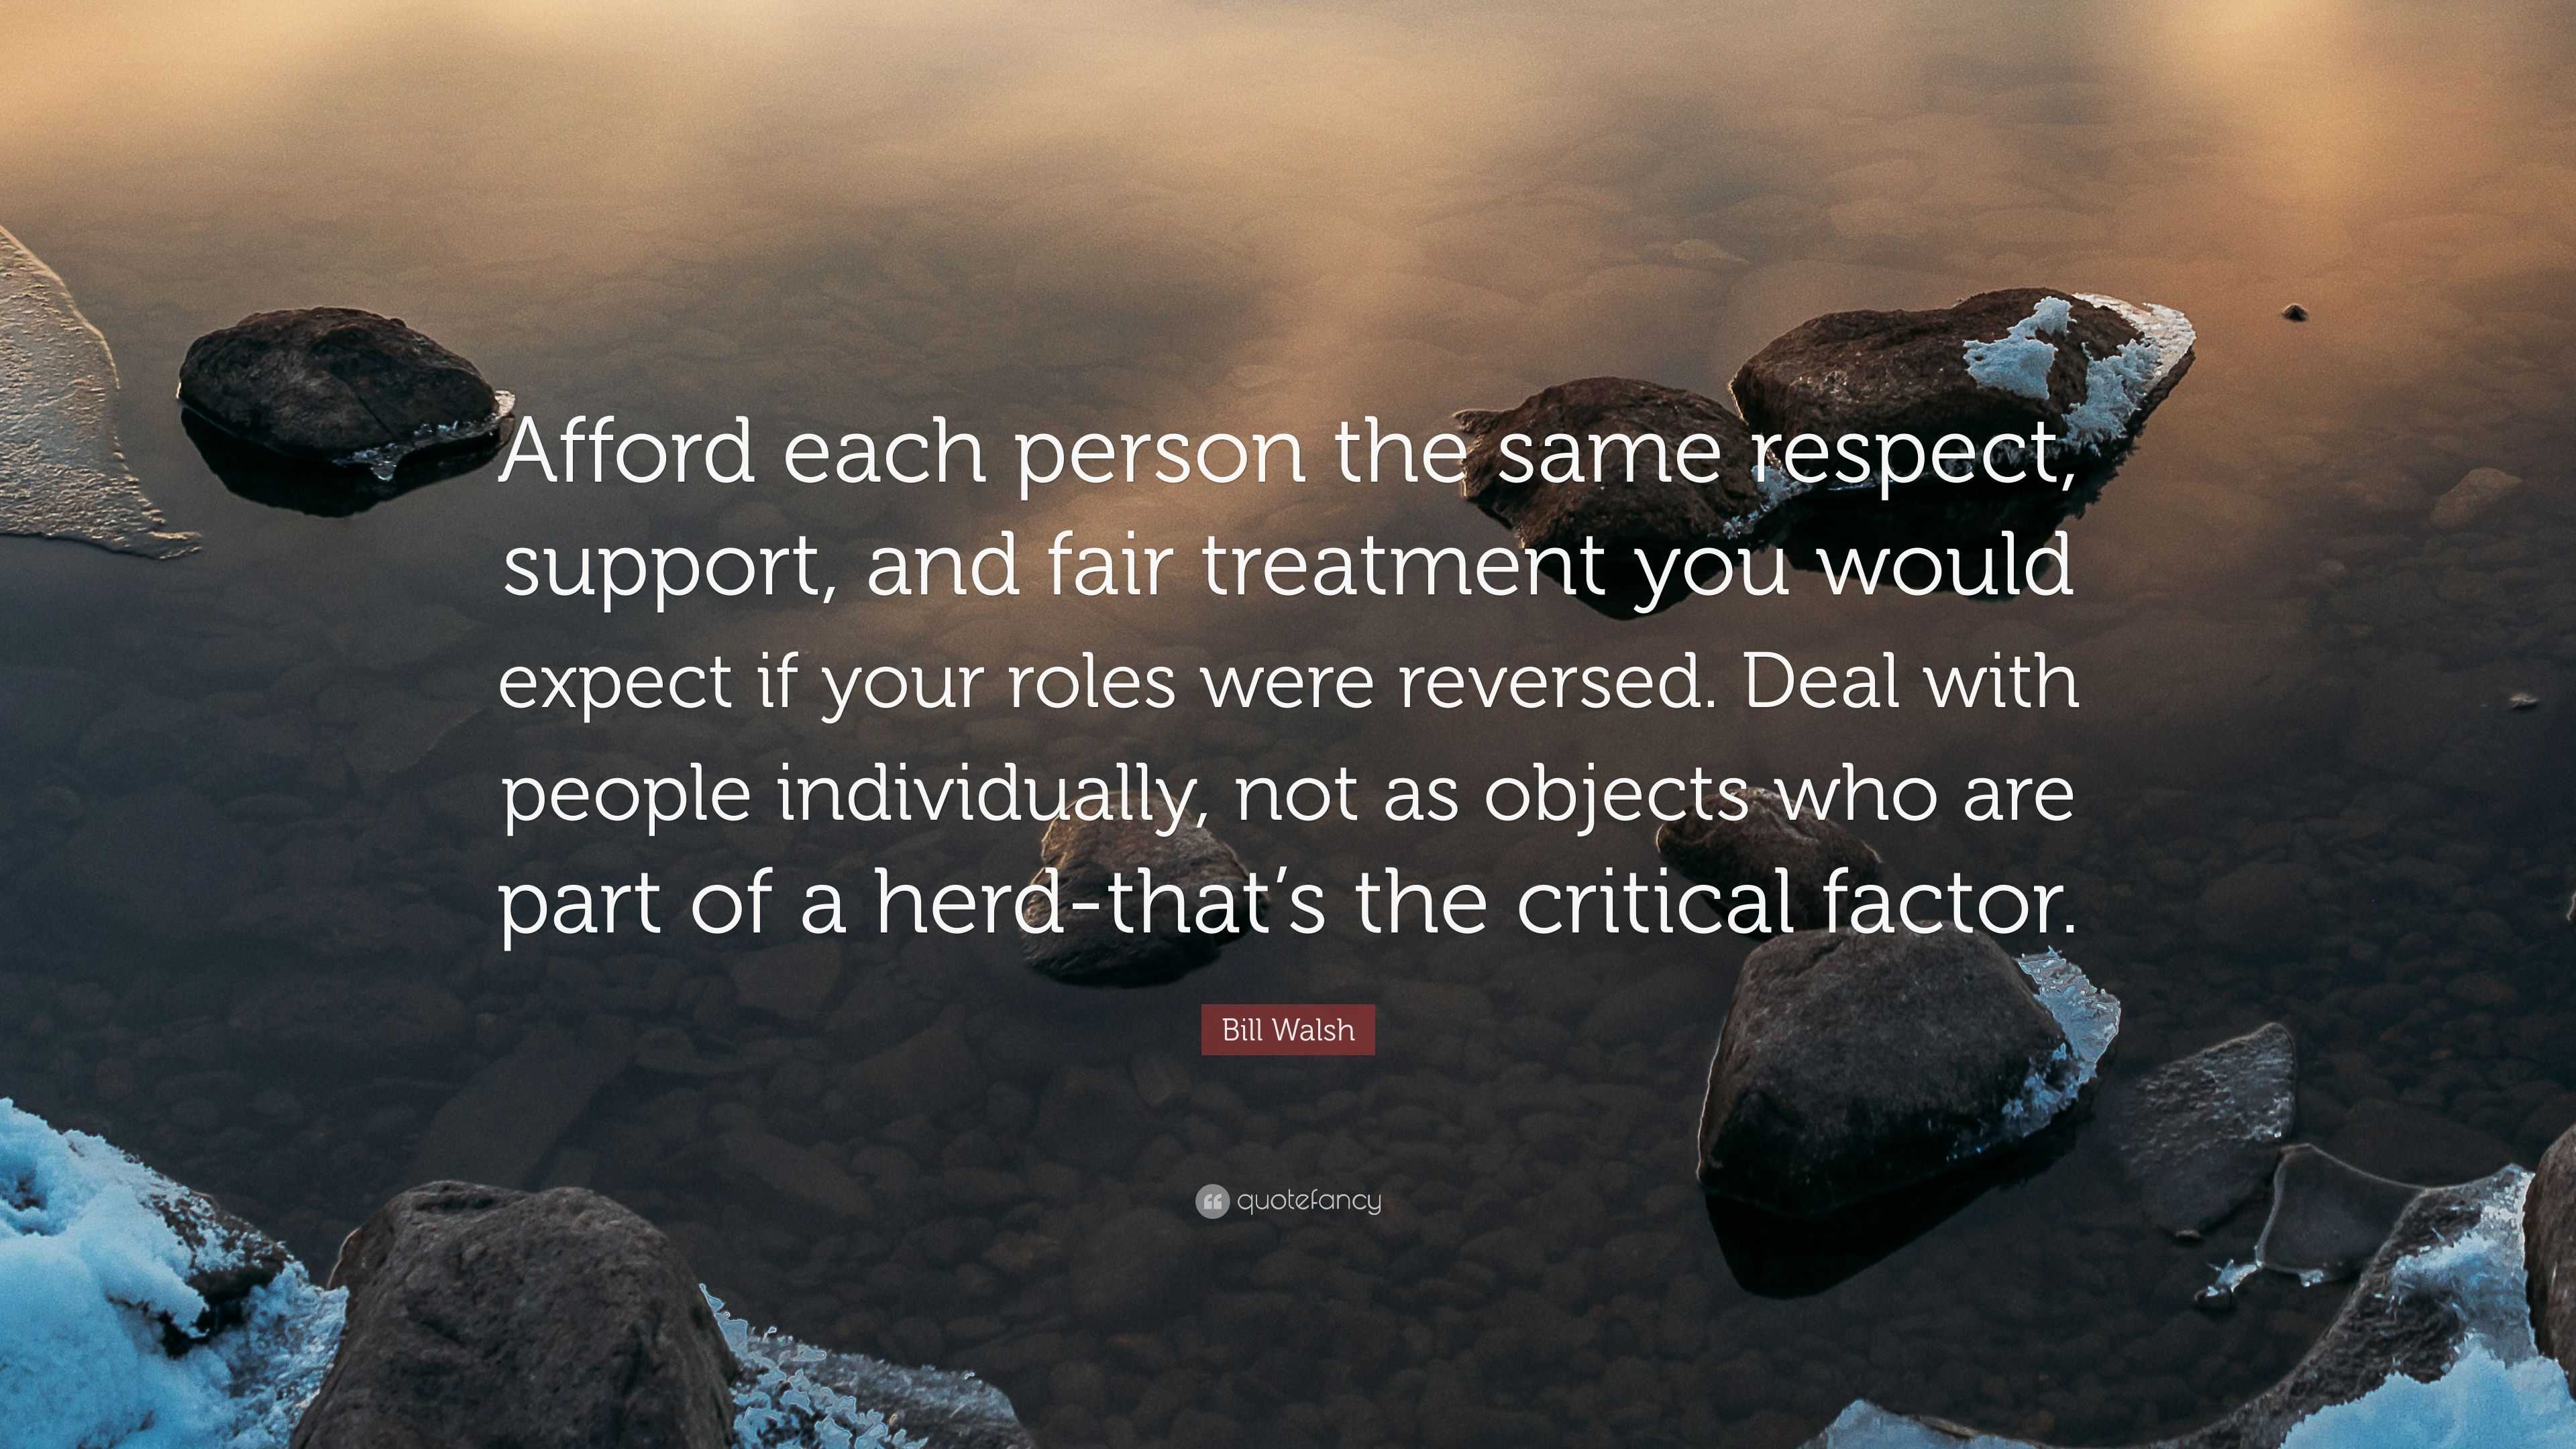 Bill Walsh Quote: “Afford each person the same respect, support, and ...